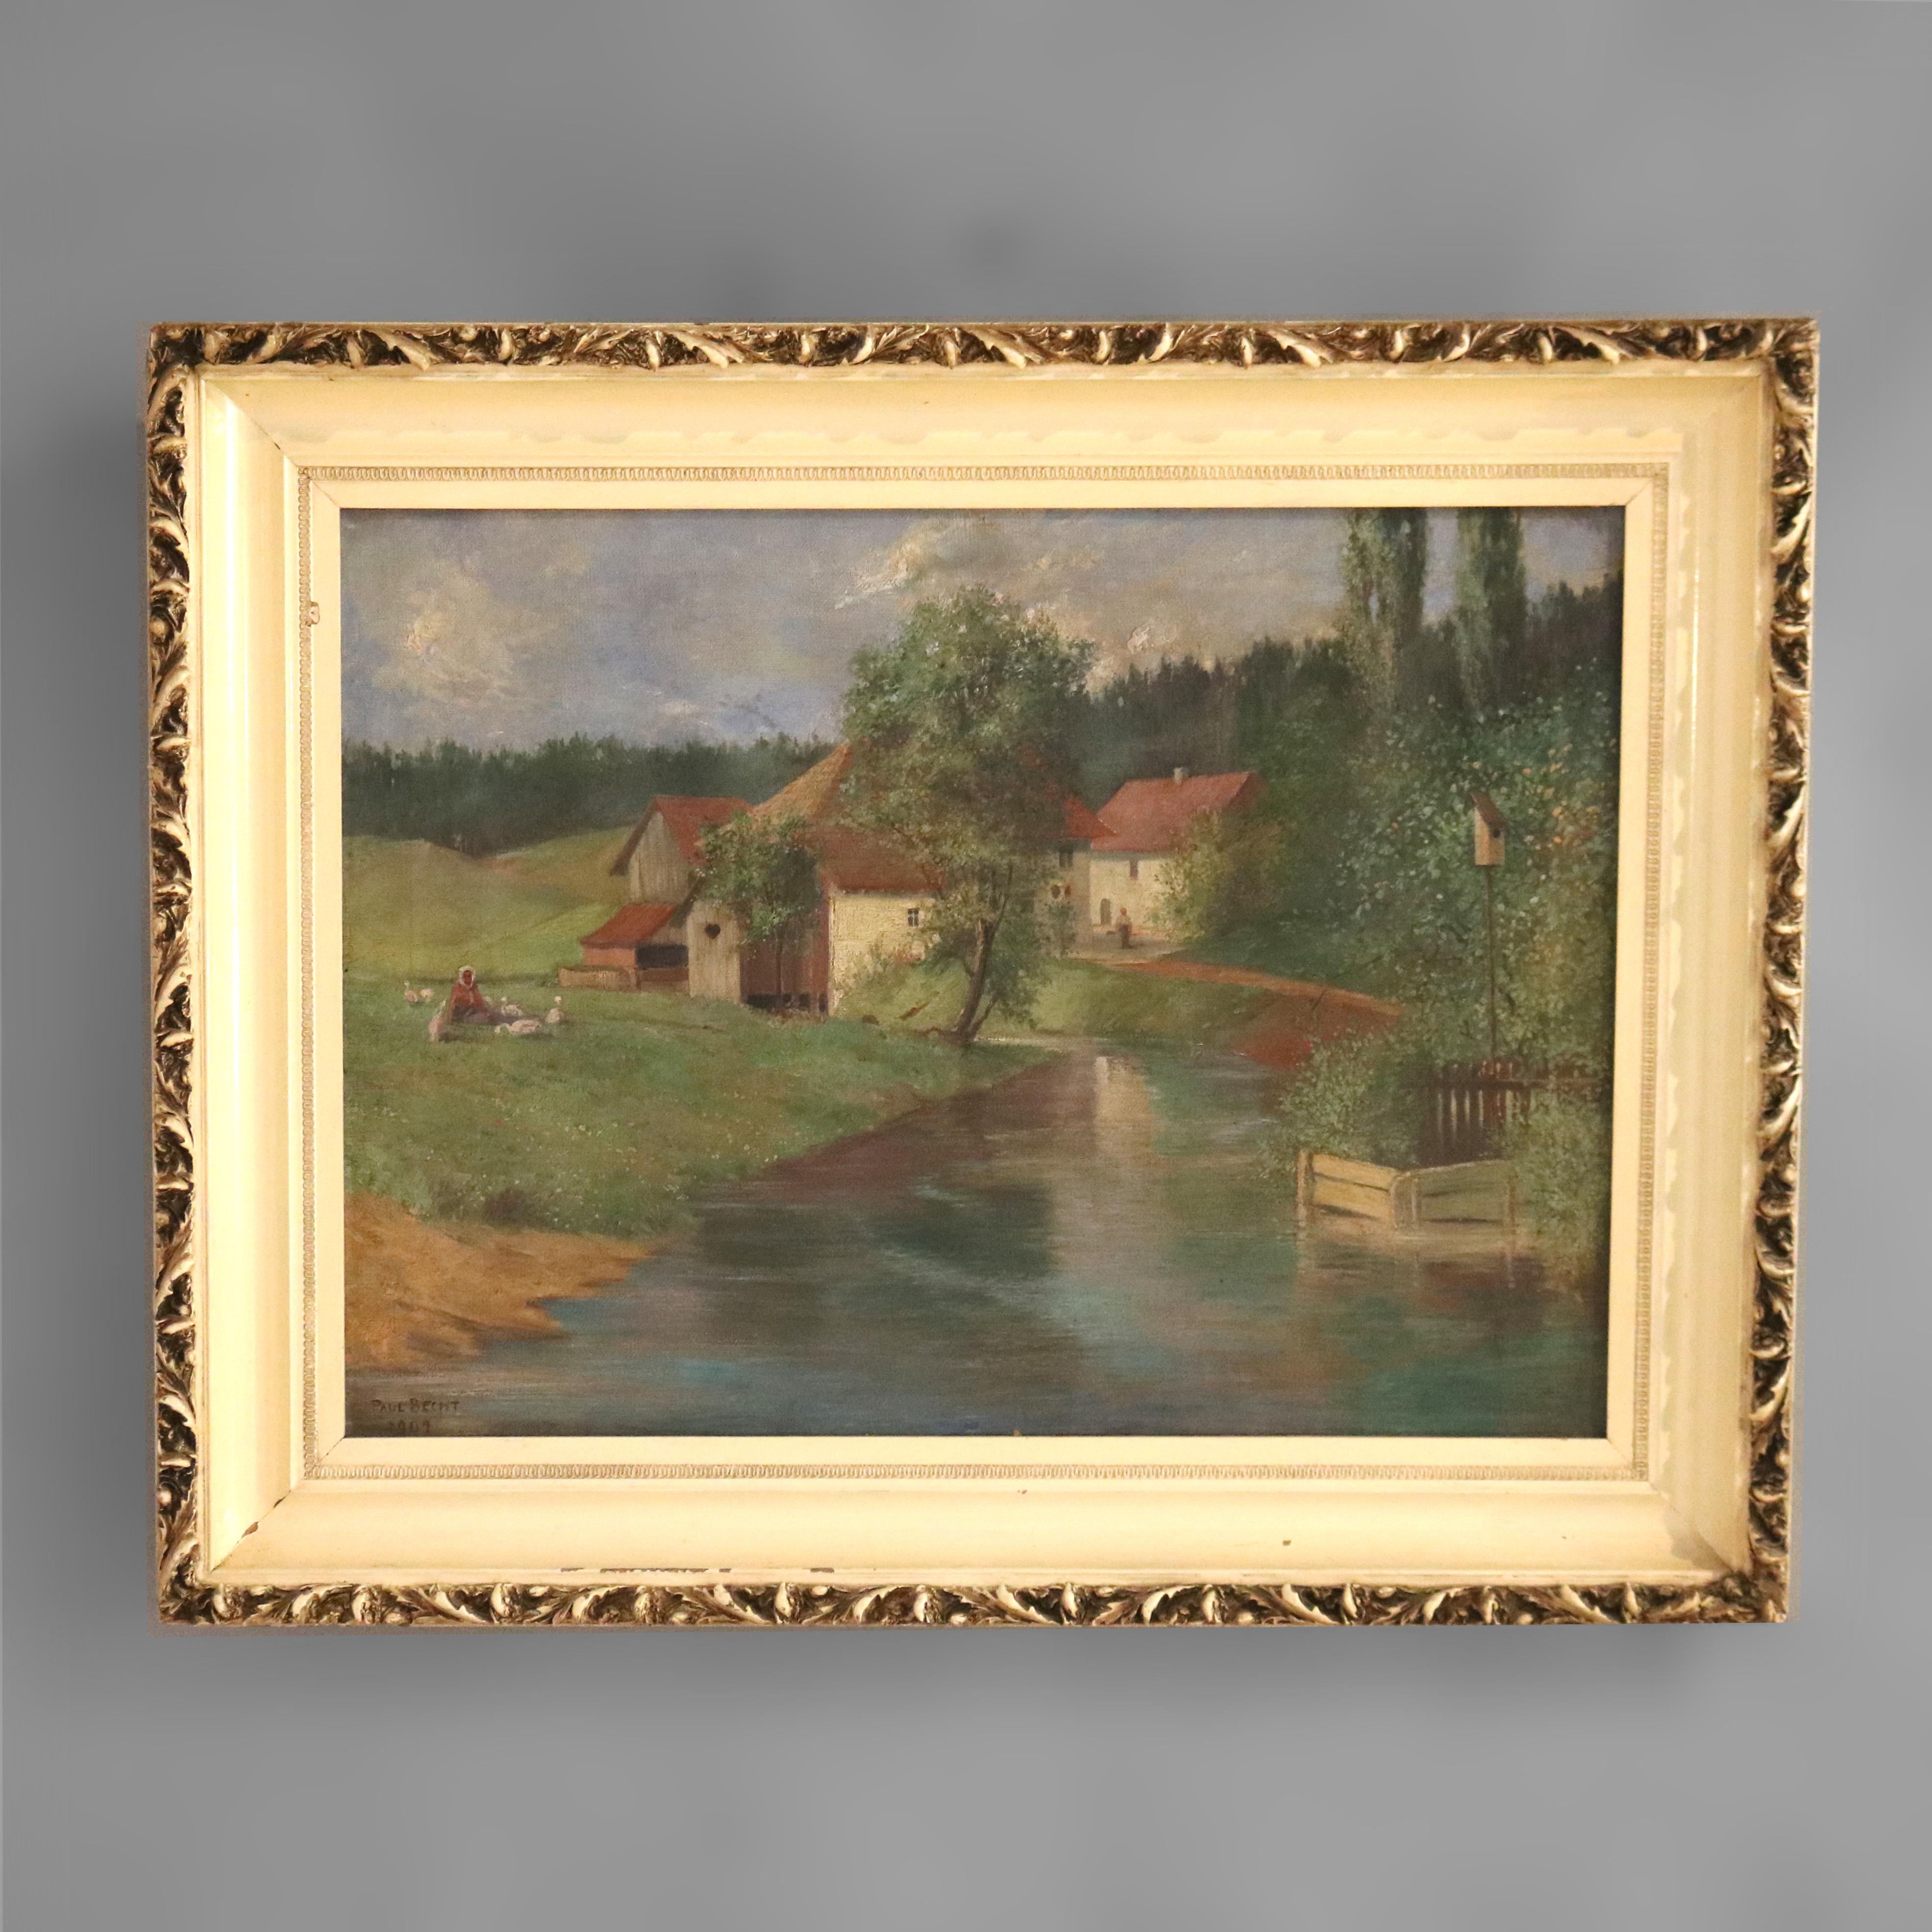 An antique painting by Brecht offers oil on canvas landscape farm scene with figures, ducks, structures and stream,; artist signed as photographed; seated in parcel gilt frame; circa 1907

Measures - 25.5